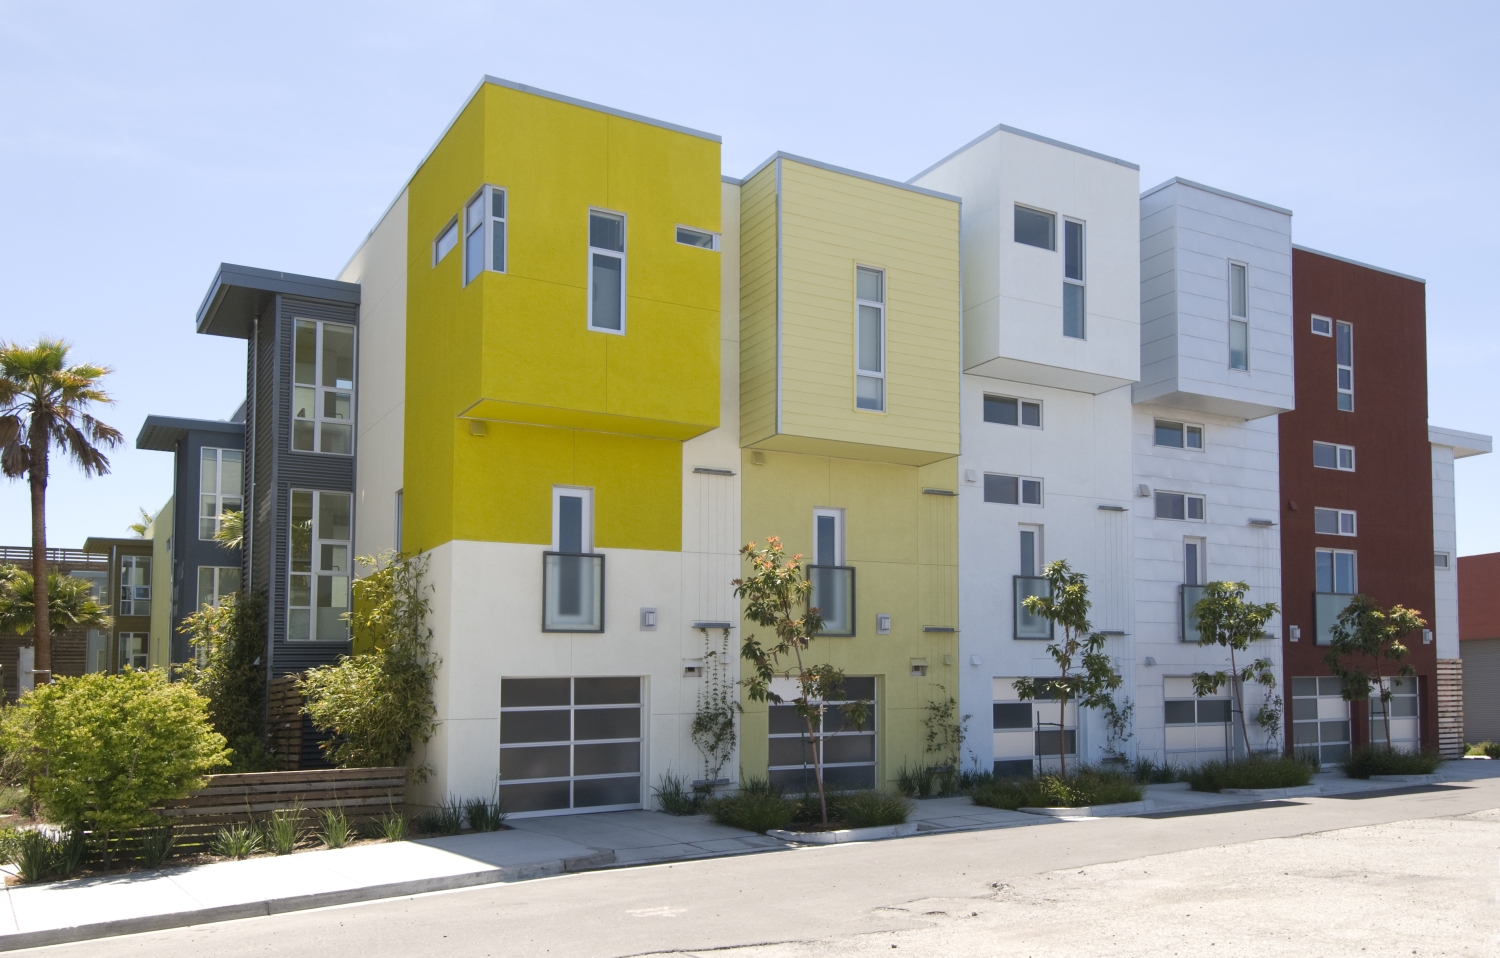 Exterior view of townhouses at Blue Star Corner in Emeryville, Ca.